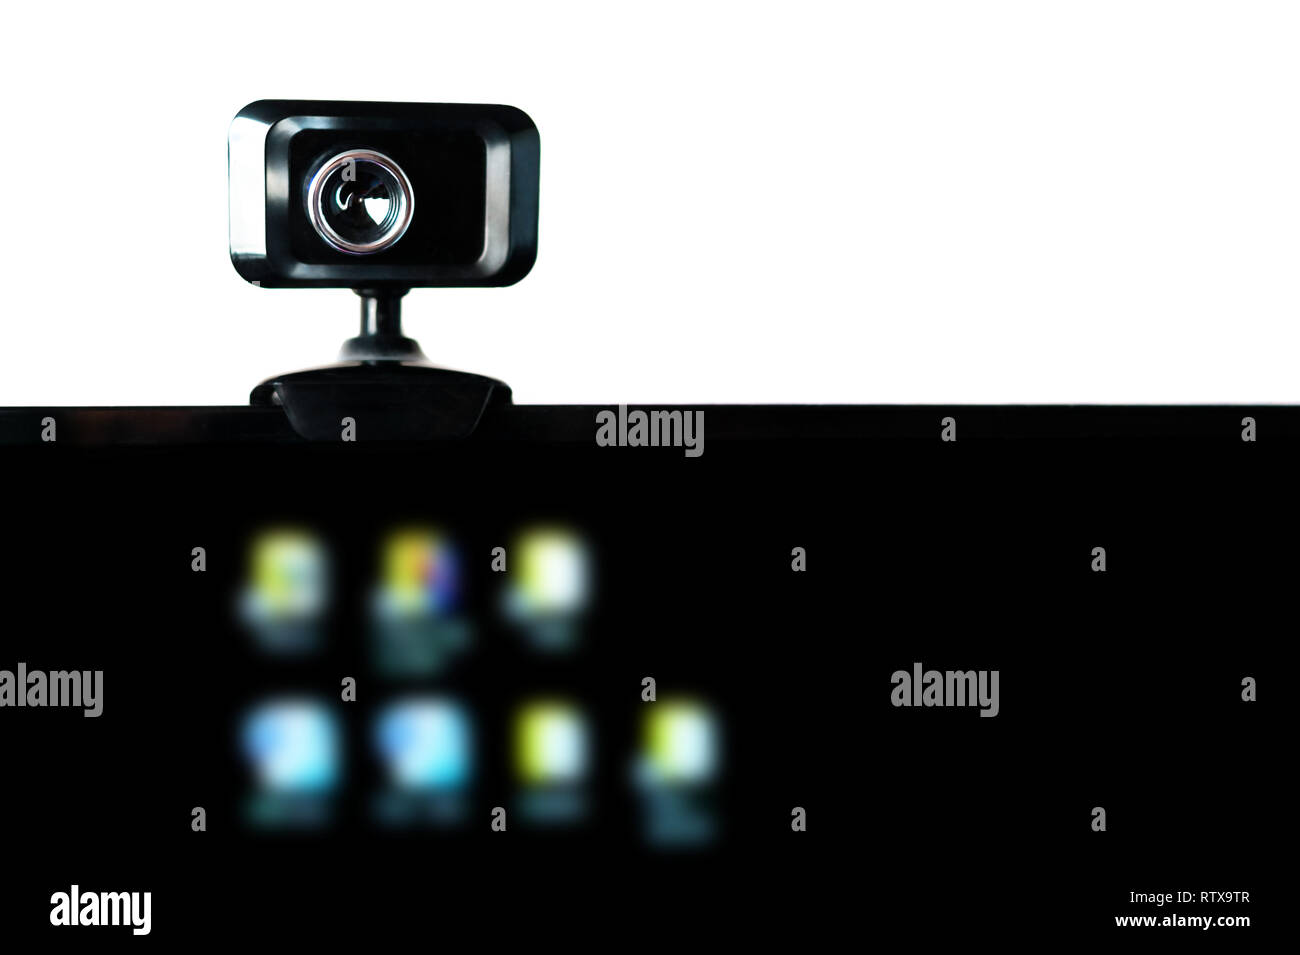 USB Webcam, Web Camera, Mounted on Computer Monitor with Blurred Icons on  Black Screen. Video Streaming, Webinar, Conference Call. Data Protection,  Ne Stock Photo - Alamy